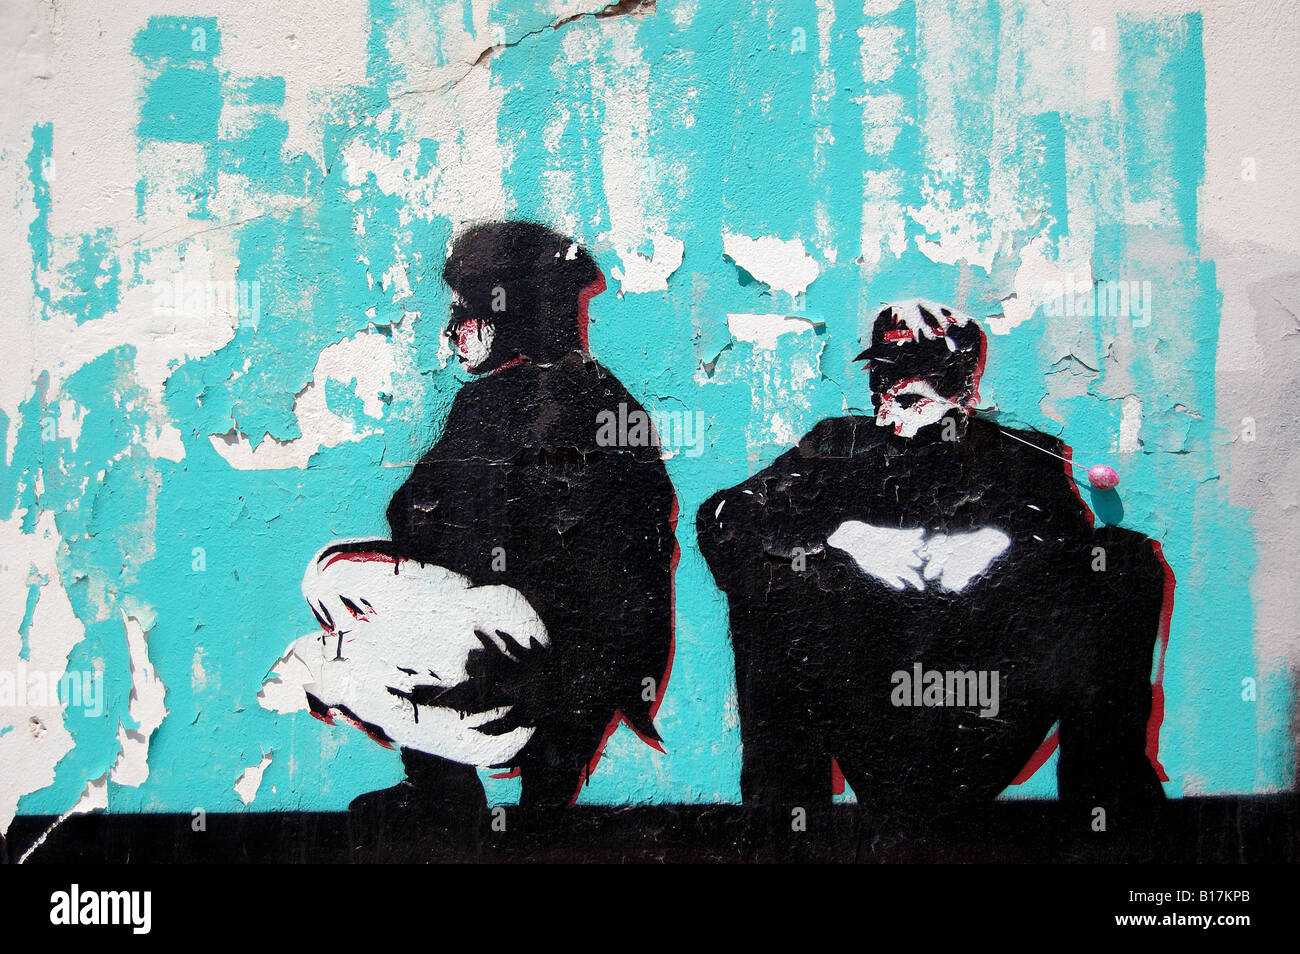 Stencil graffiti against an old weathered wall with peeling paint. Urban street art background. Stock Photo